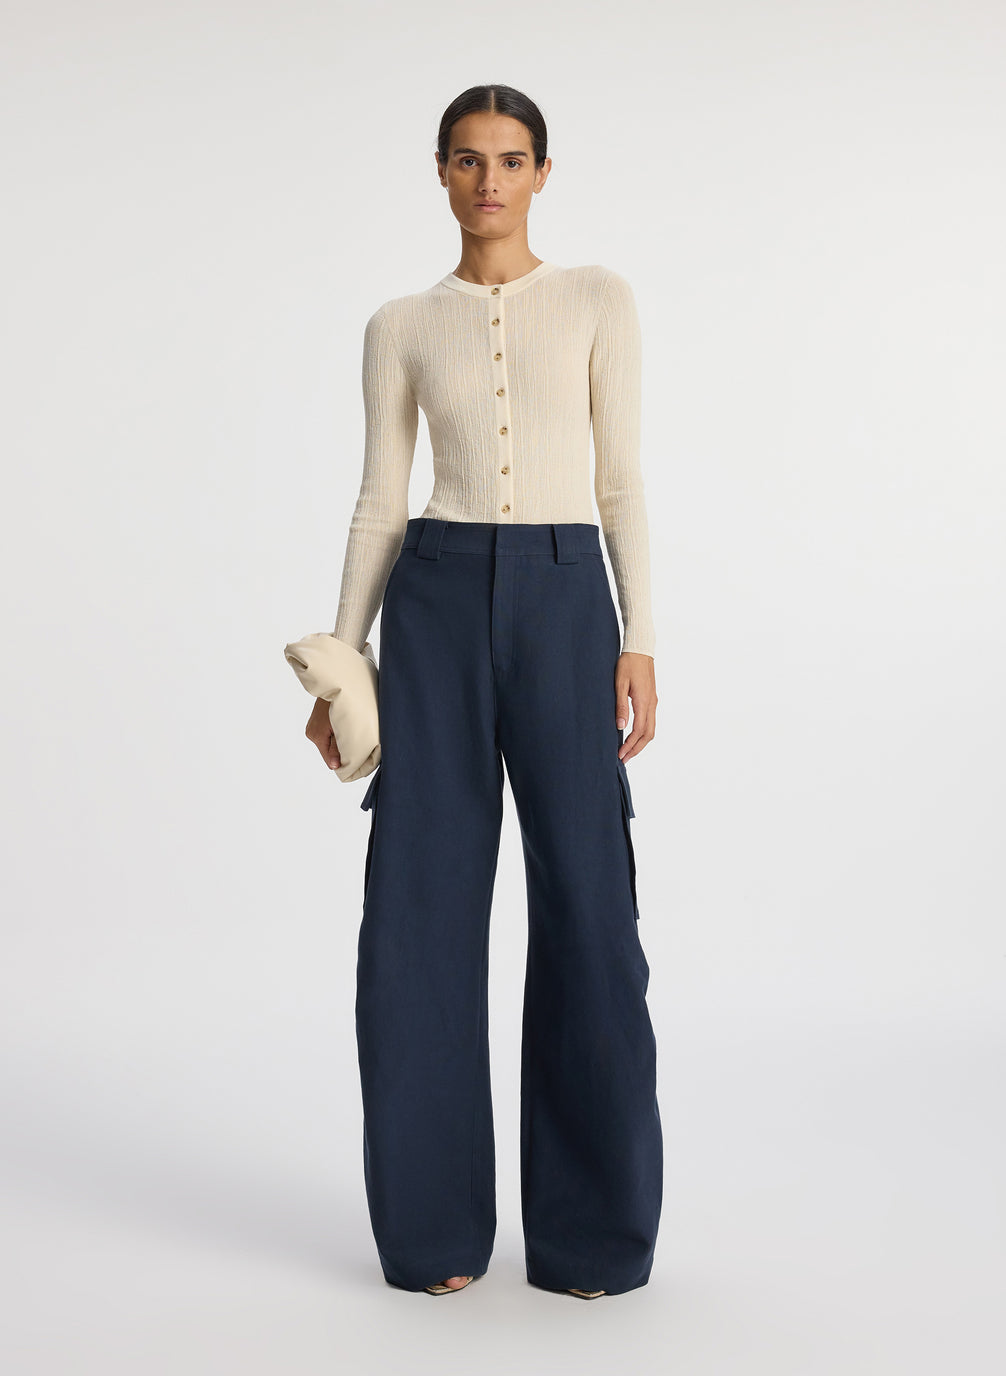 front view of woman wearing white cardigan and navy blue cargo pants